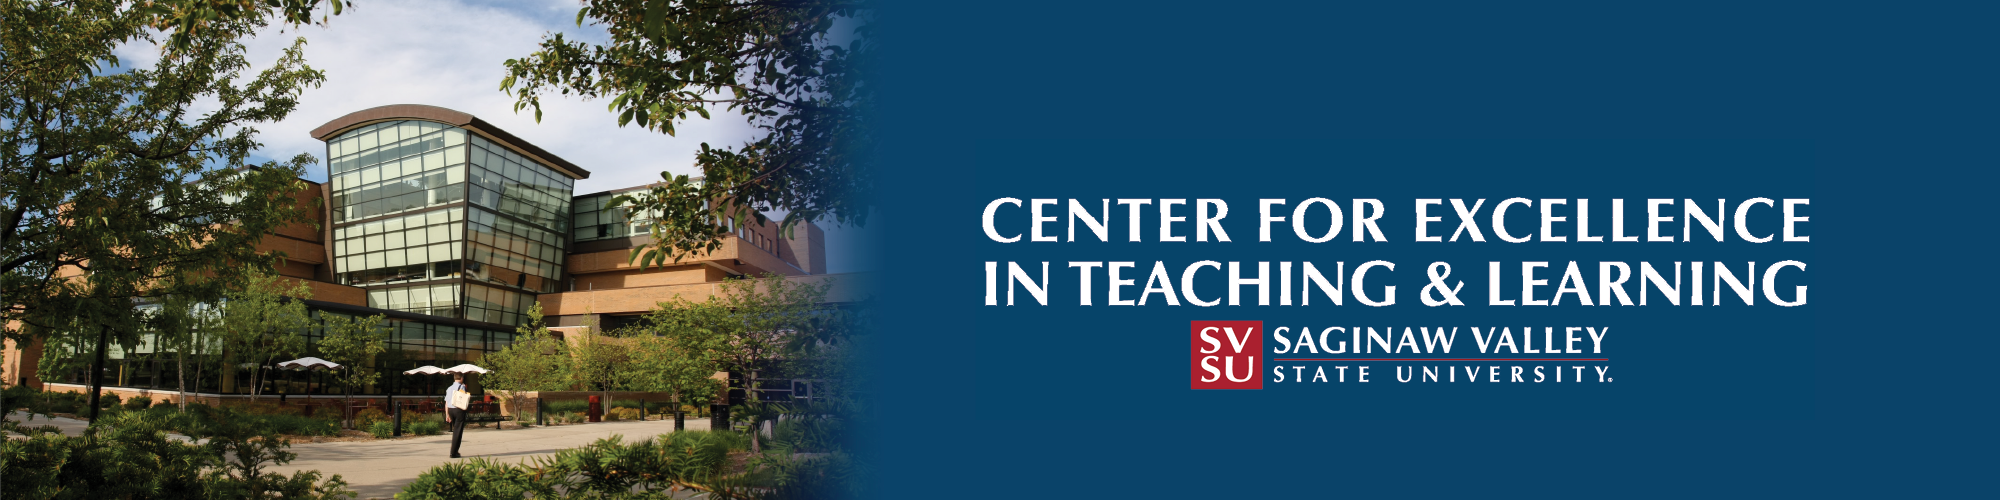 Banner with an image of a building with the words,  SVSU, Saginaw Valley State University, Center for Excellence in Teaching and Learning